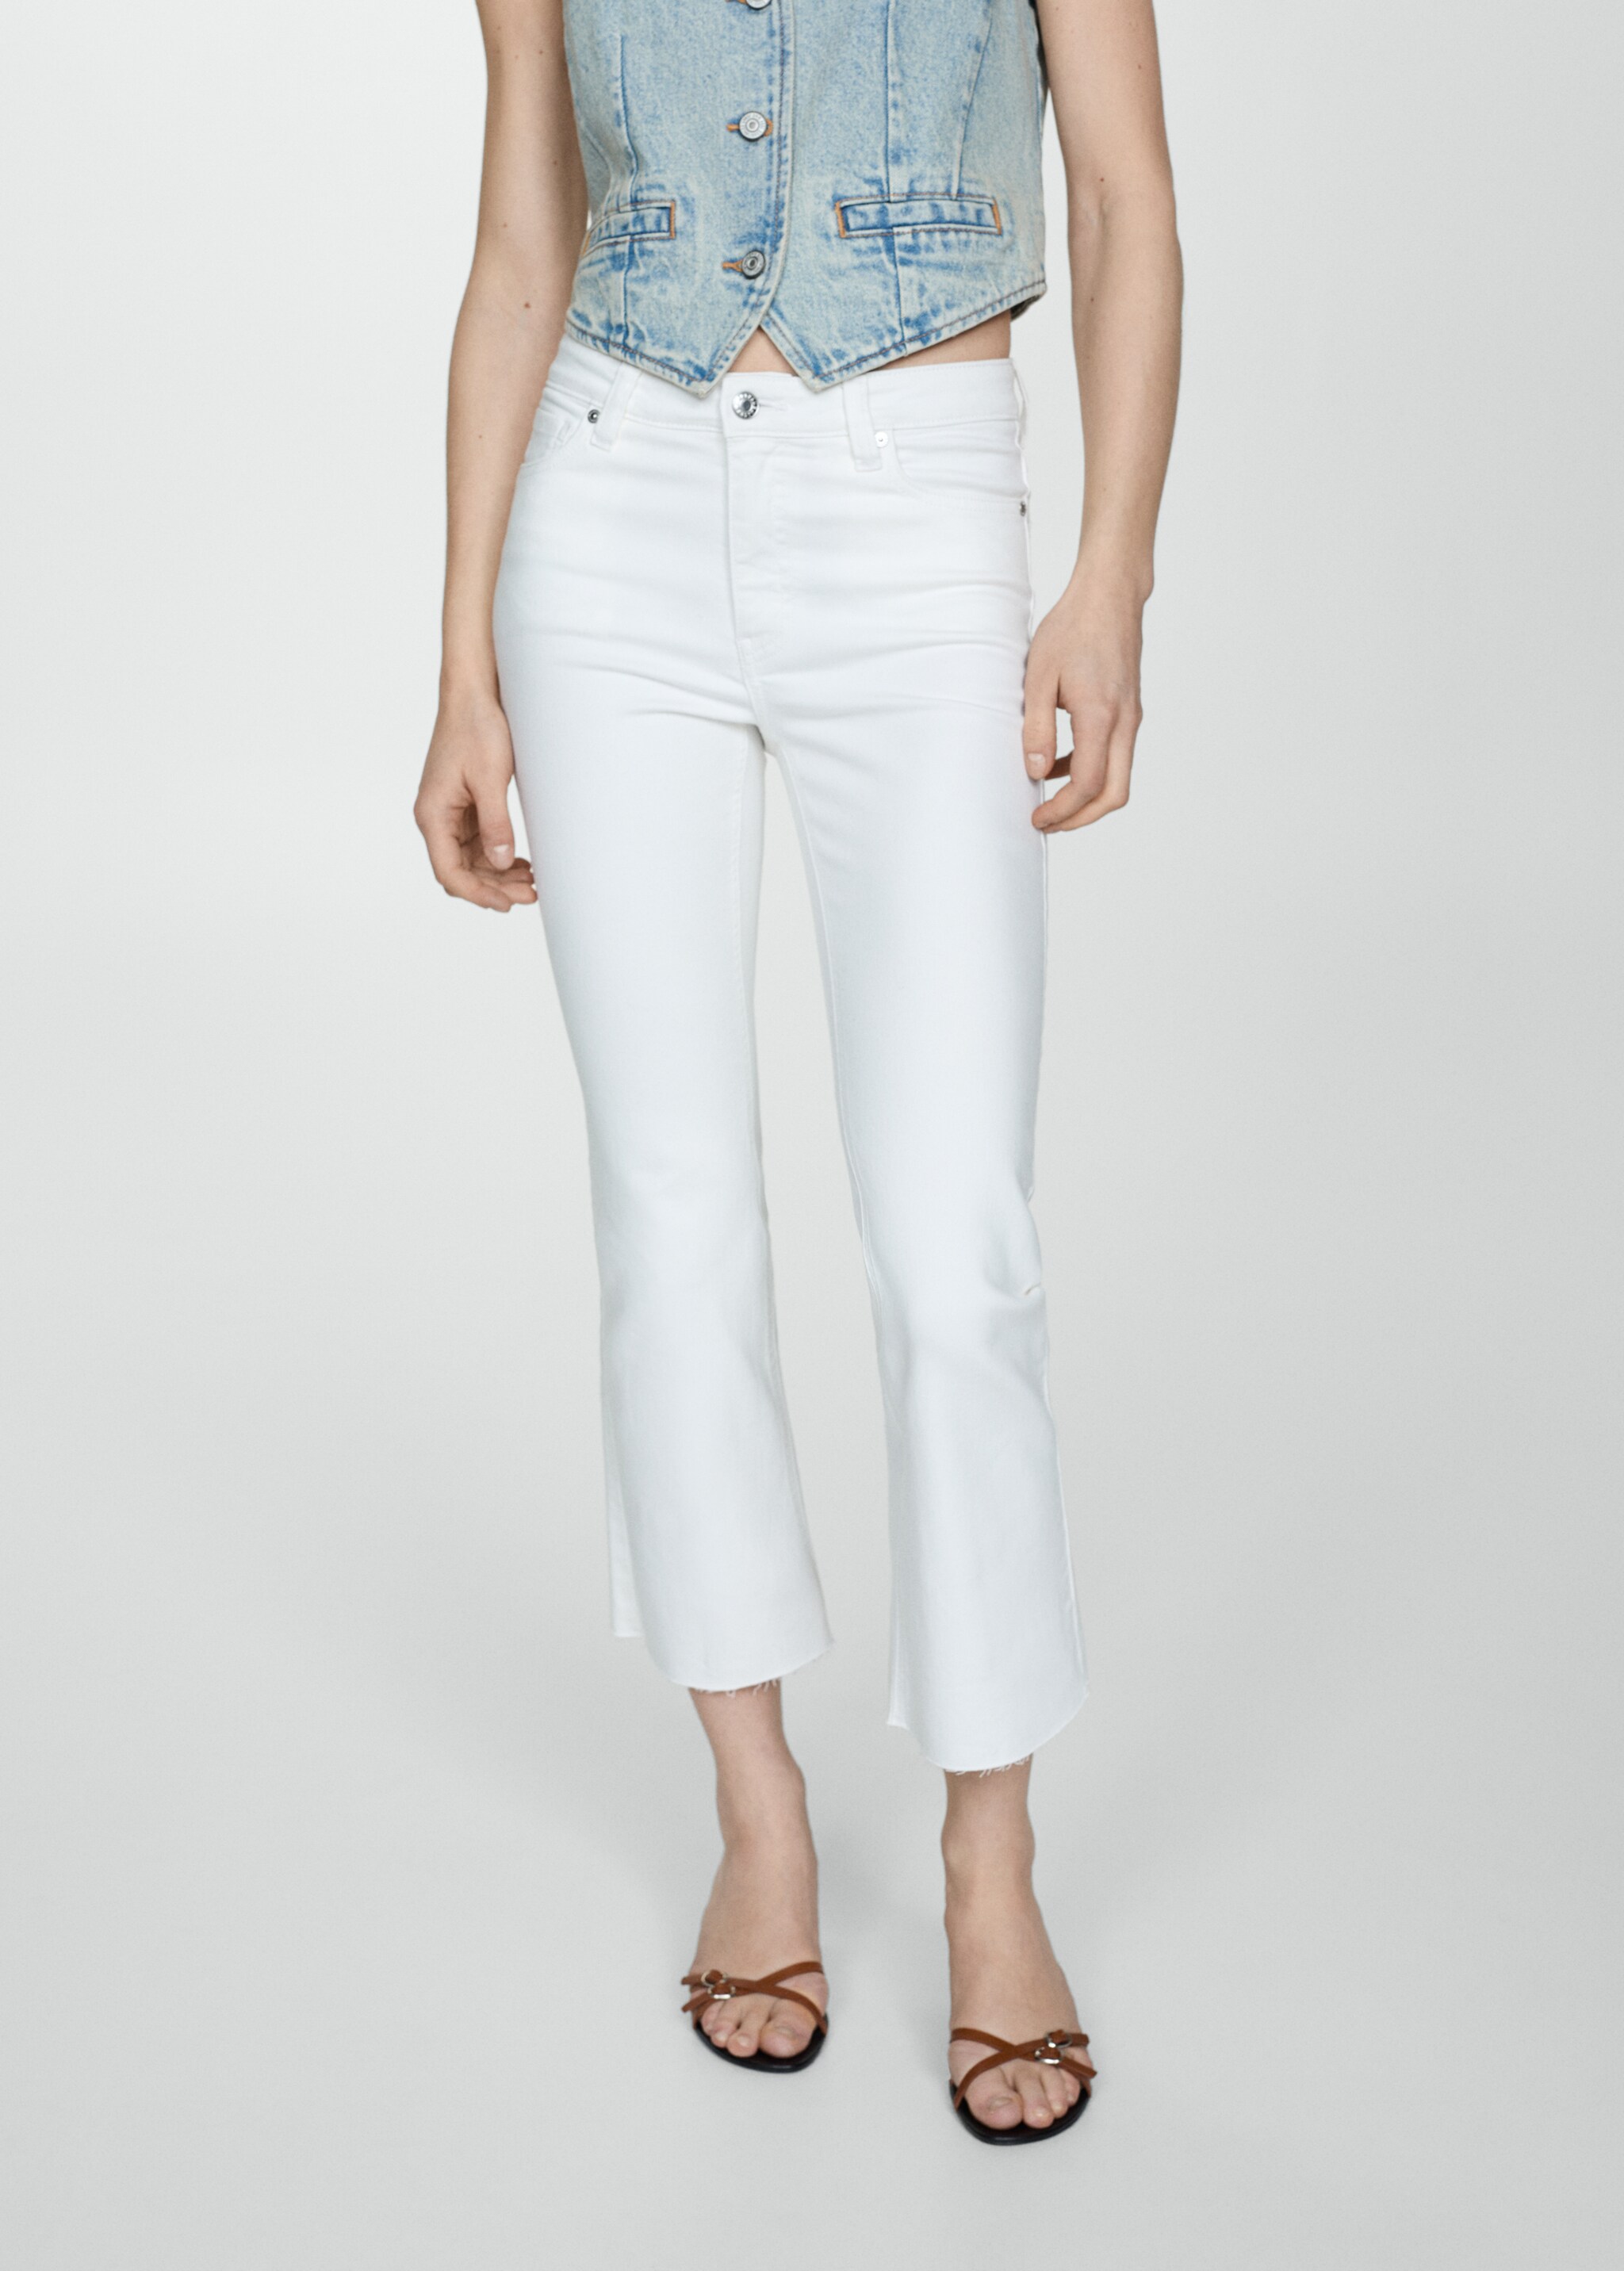 Jeans Sienna flare crop - Details of the article 3